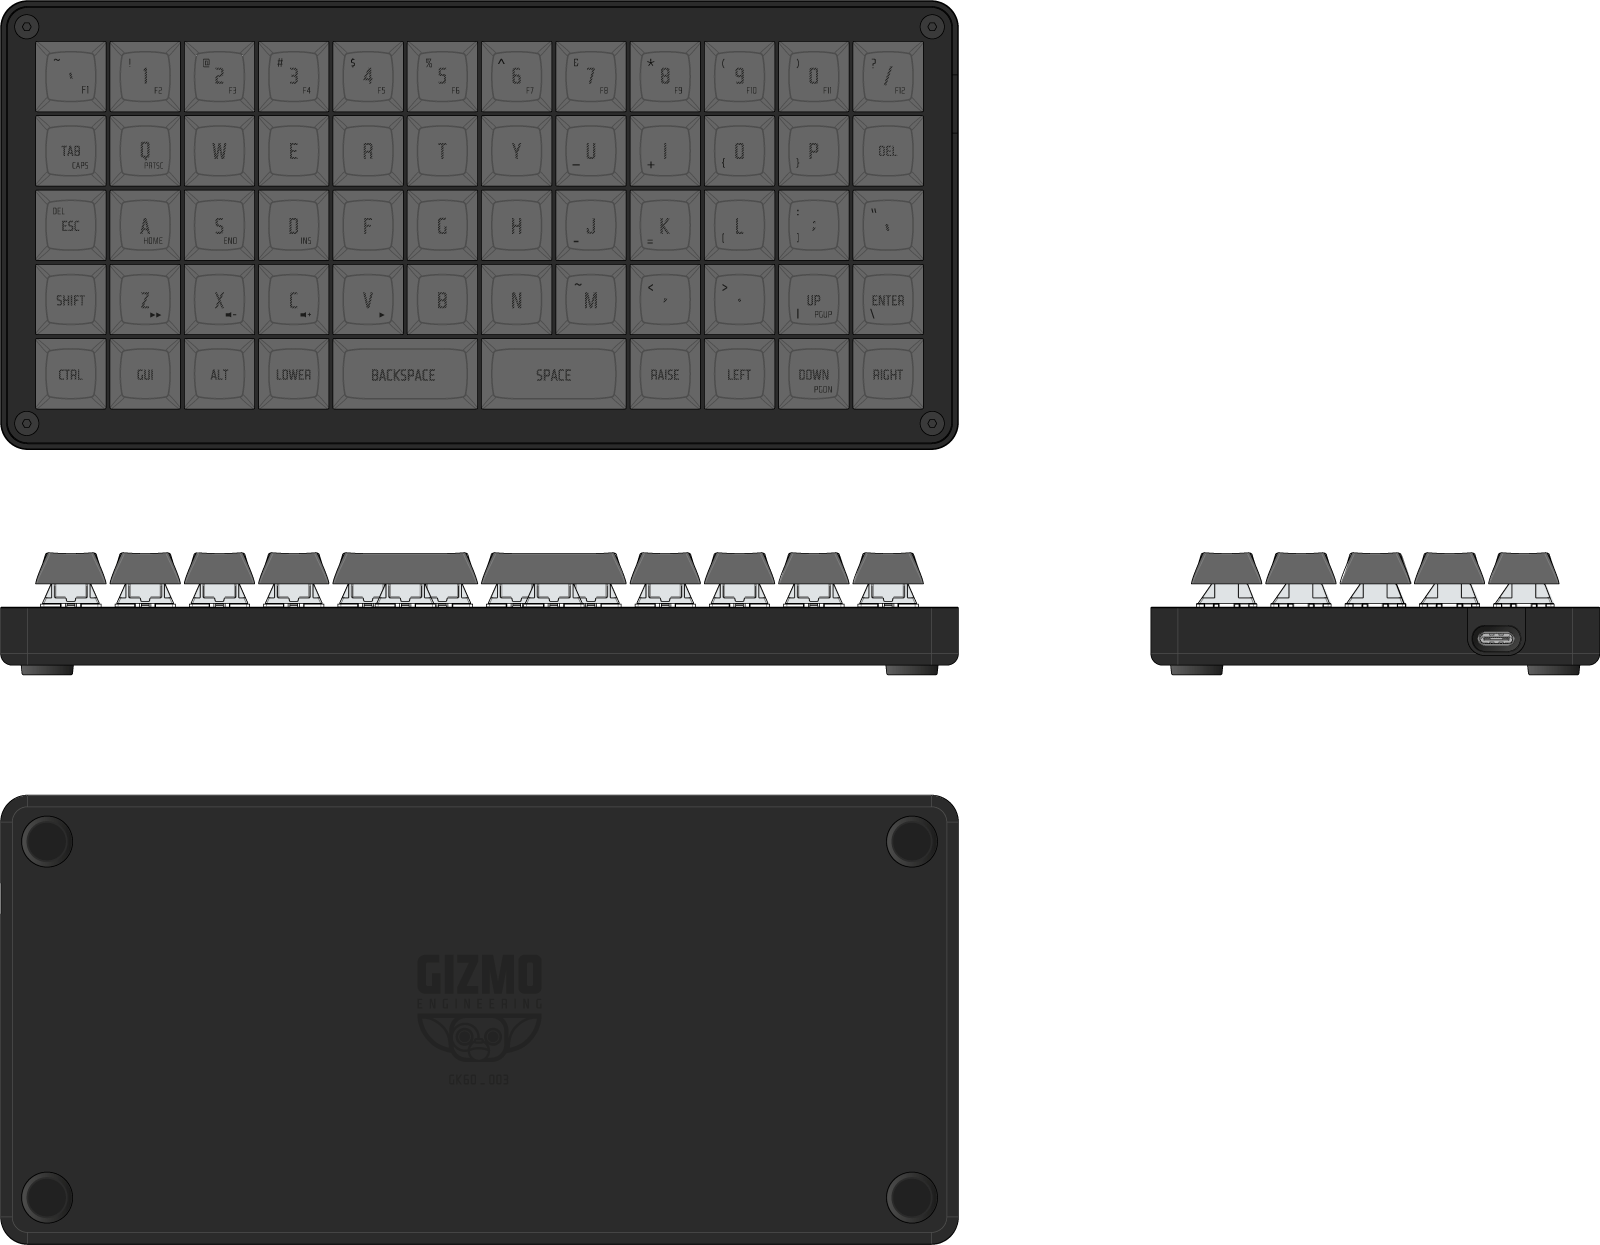 GK6 dimensions view